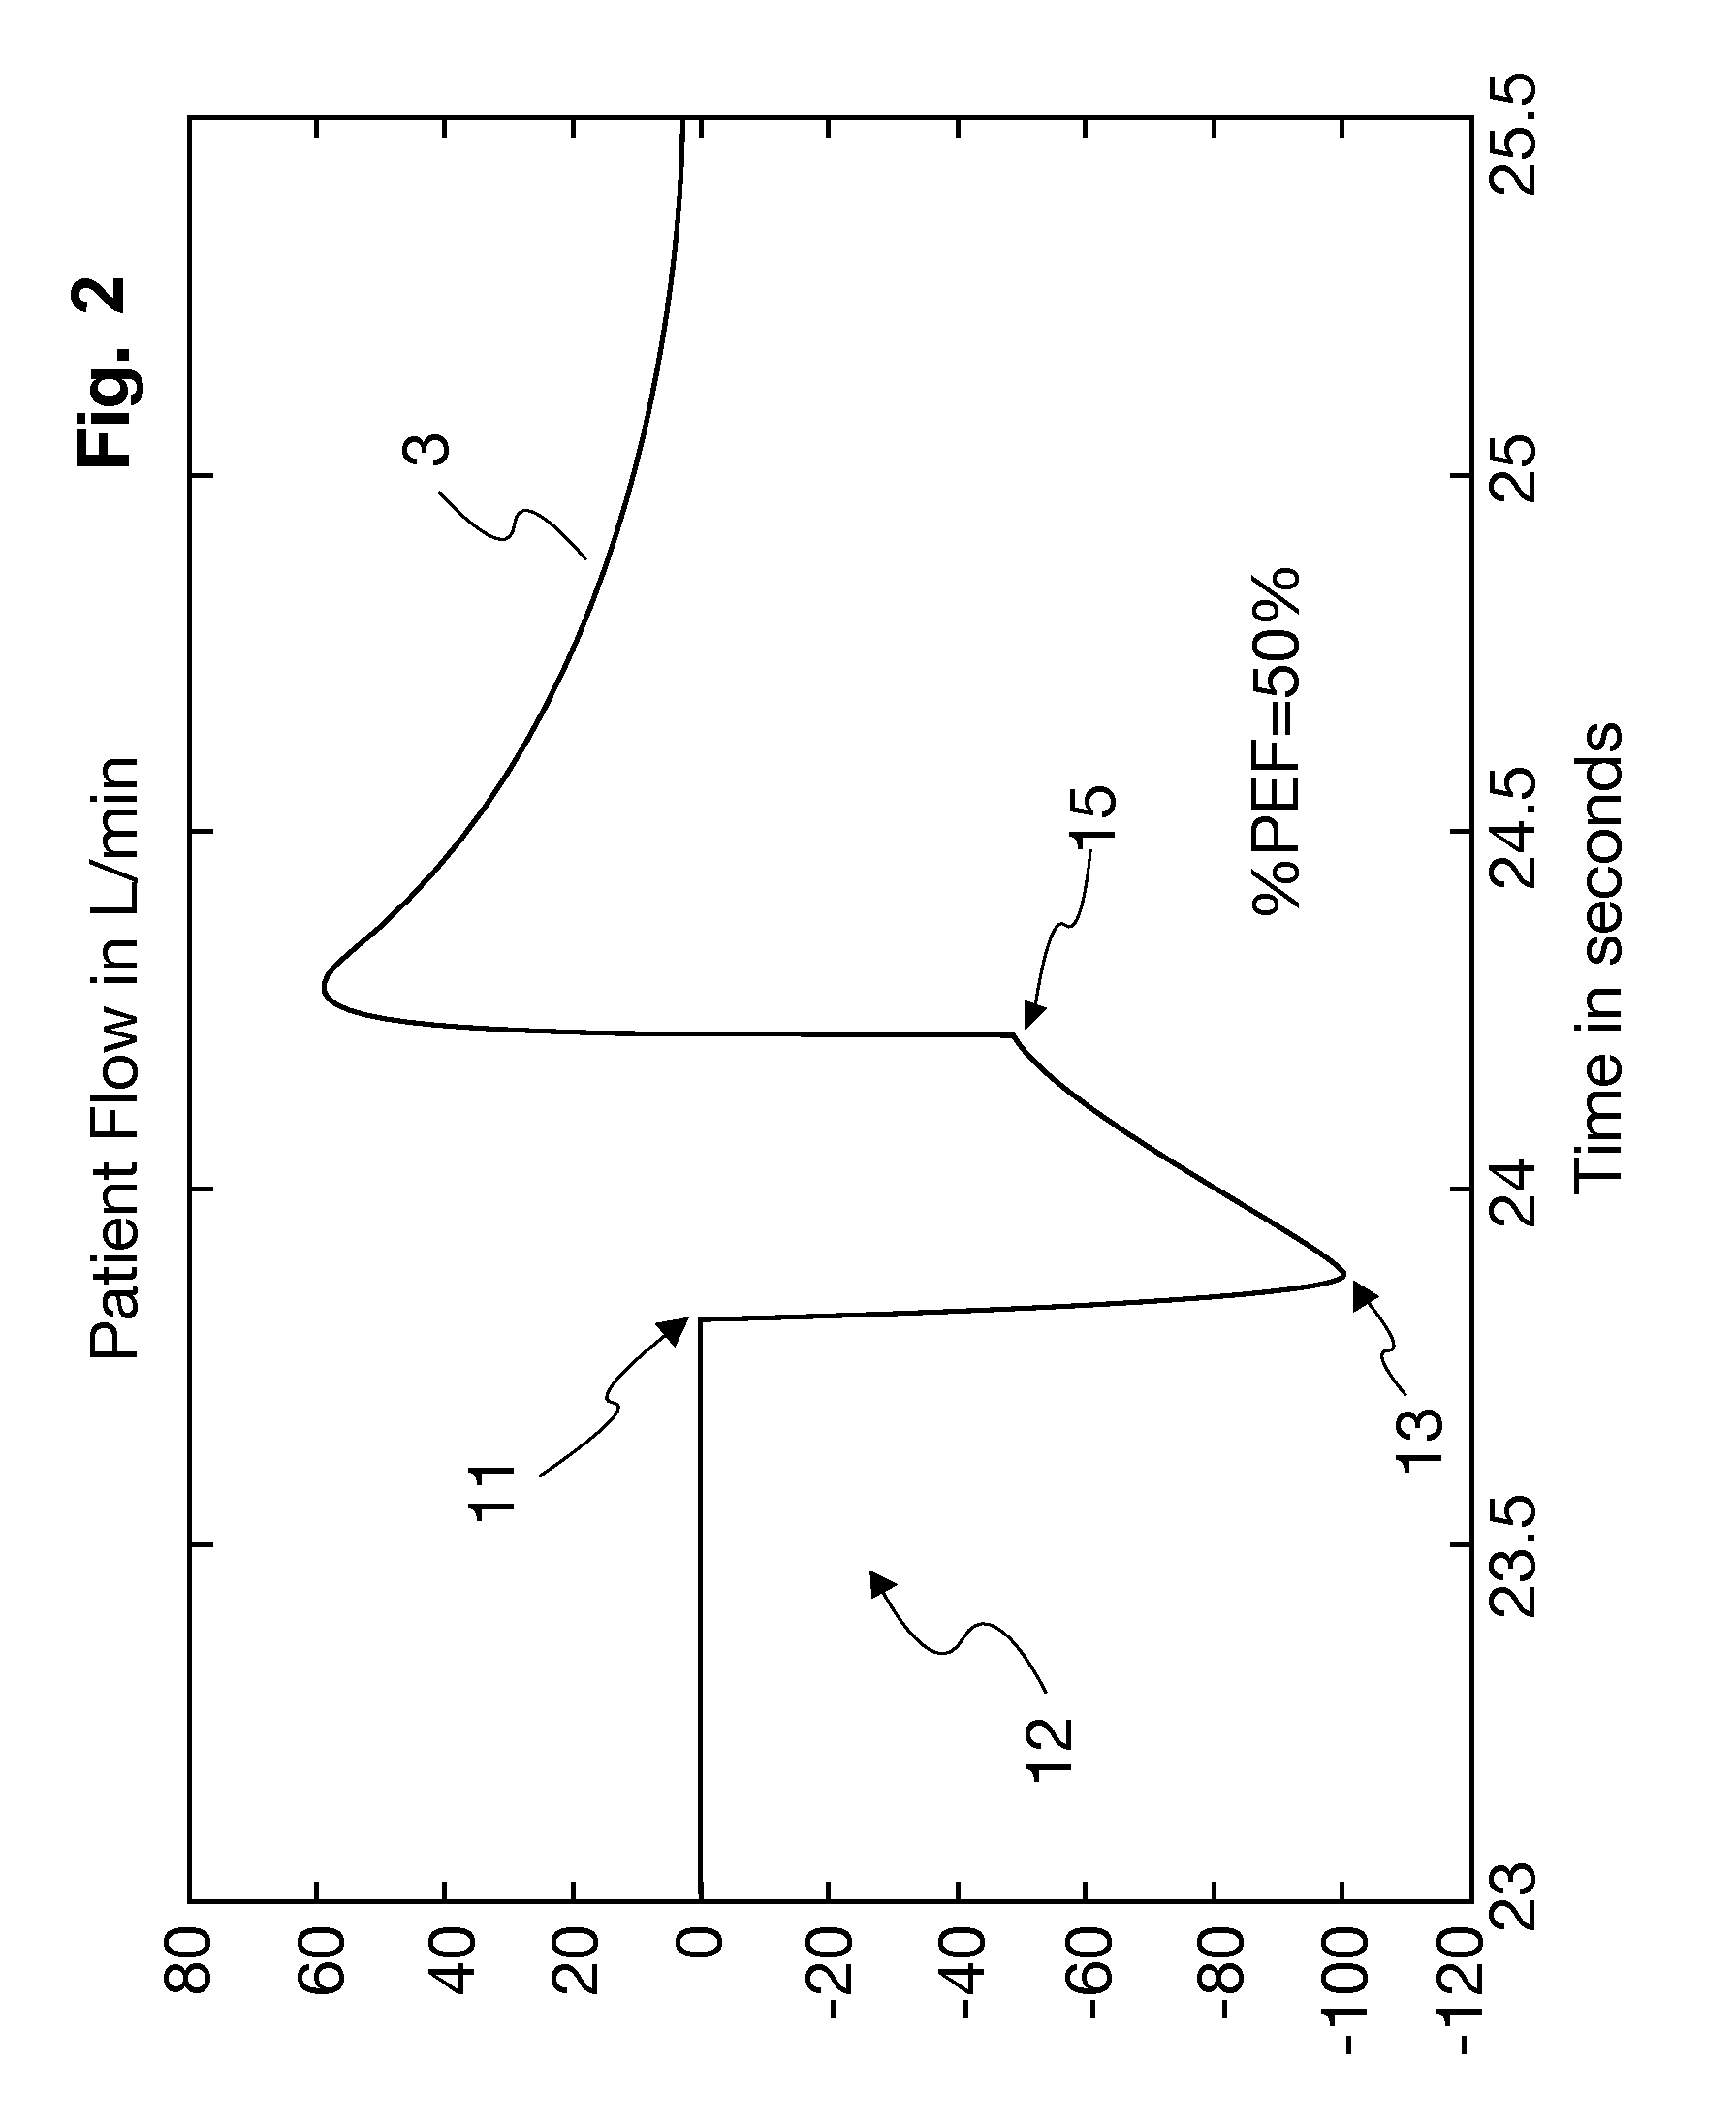 Process for operating a respirator and/or anesthesia device in the aprv mode with the %pef criterion and a device operated correspondingly